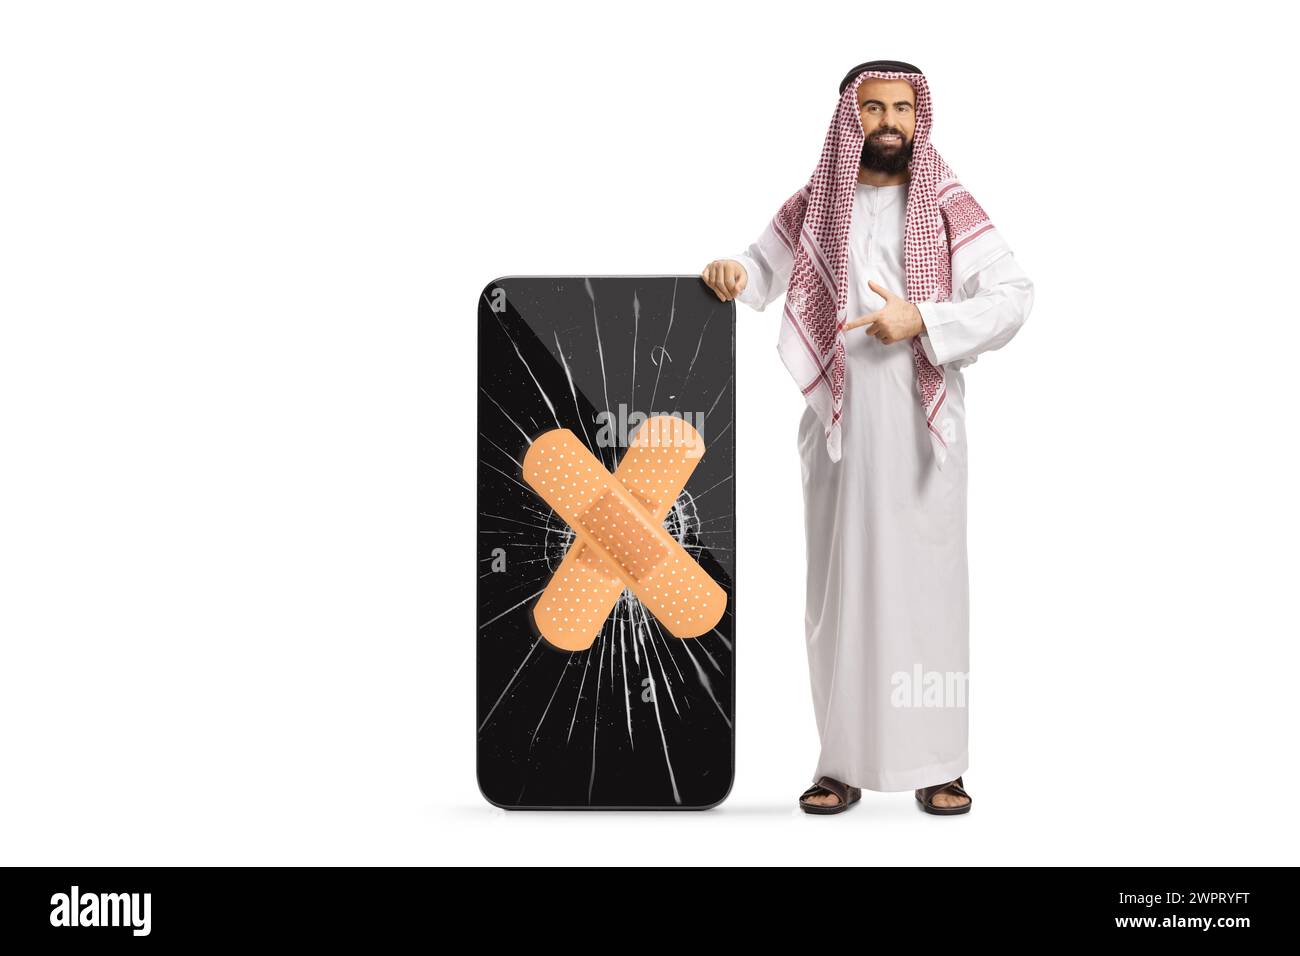 Saudi arab man in ethnic clothes pointing at a cracked screen on a smartphone fixed with a bandage isolated on white background Stock Photo